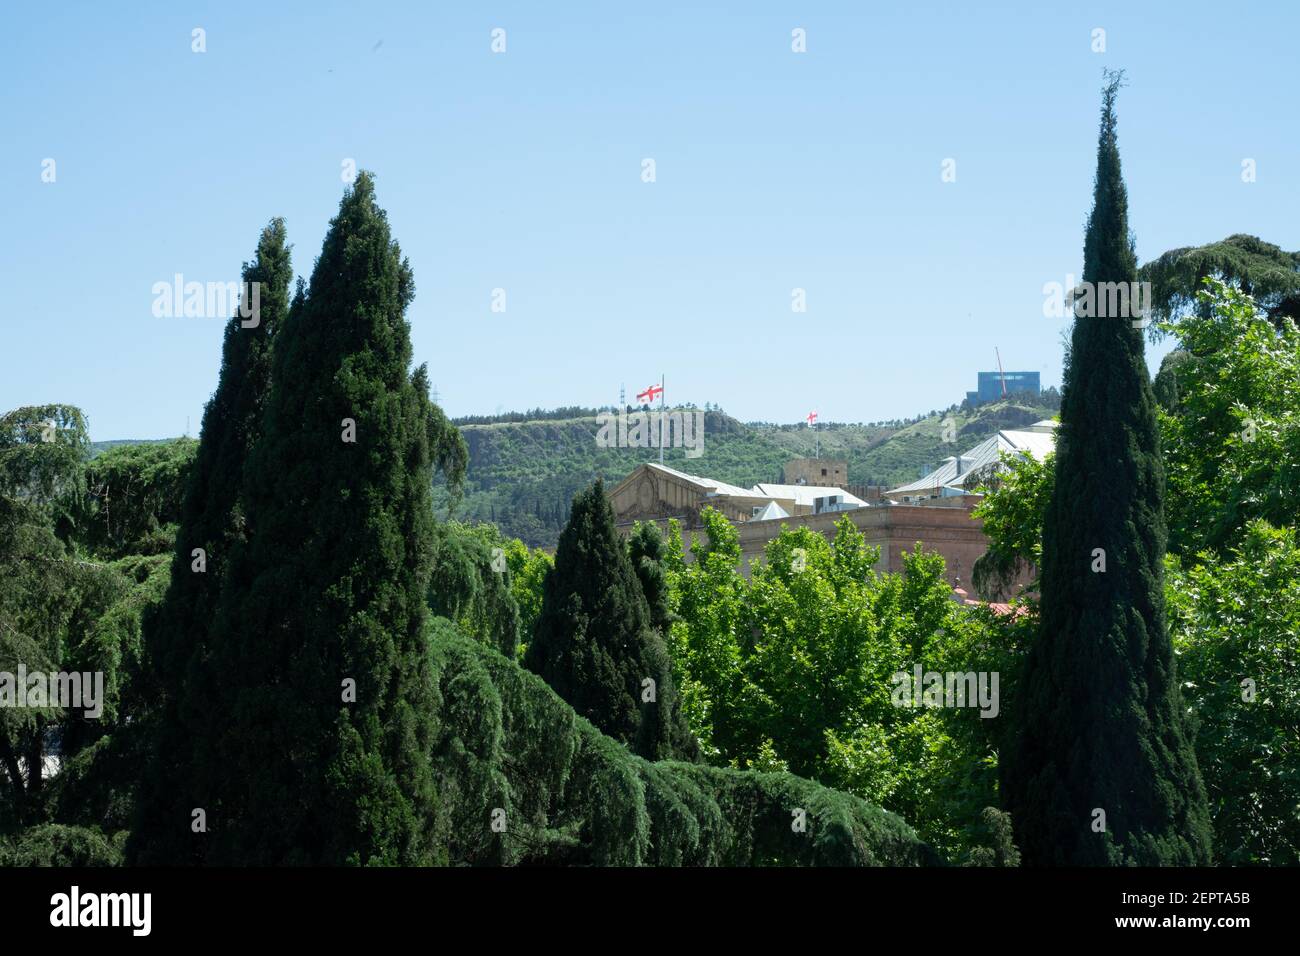 Gorgeous landscape in Tbilisi, Georgia with coniferous evergreen trees including cypresses, spruces, flag of Georgia in the middle under the blue sky Stock Photo